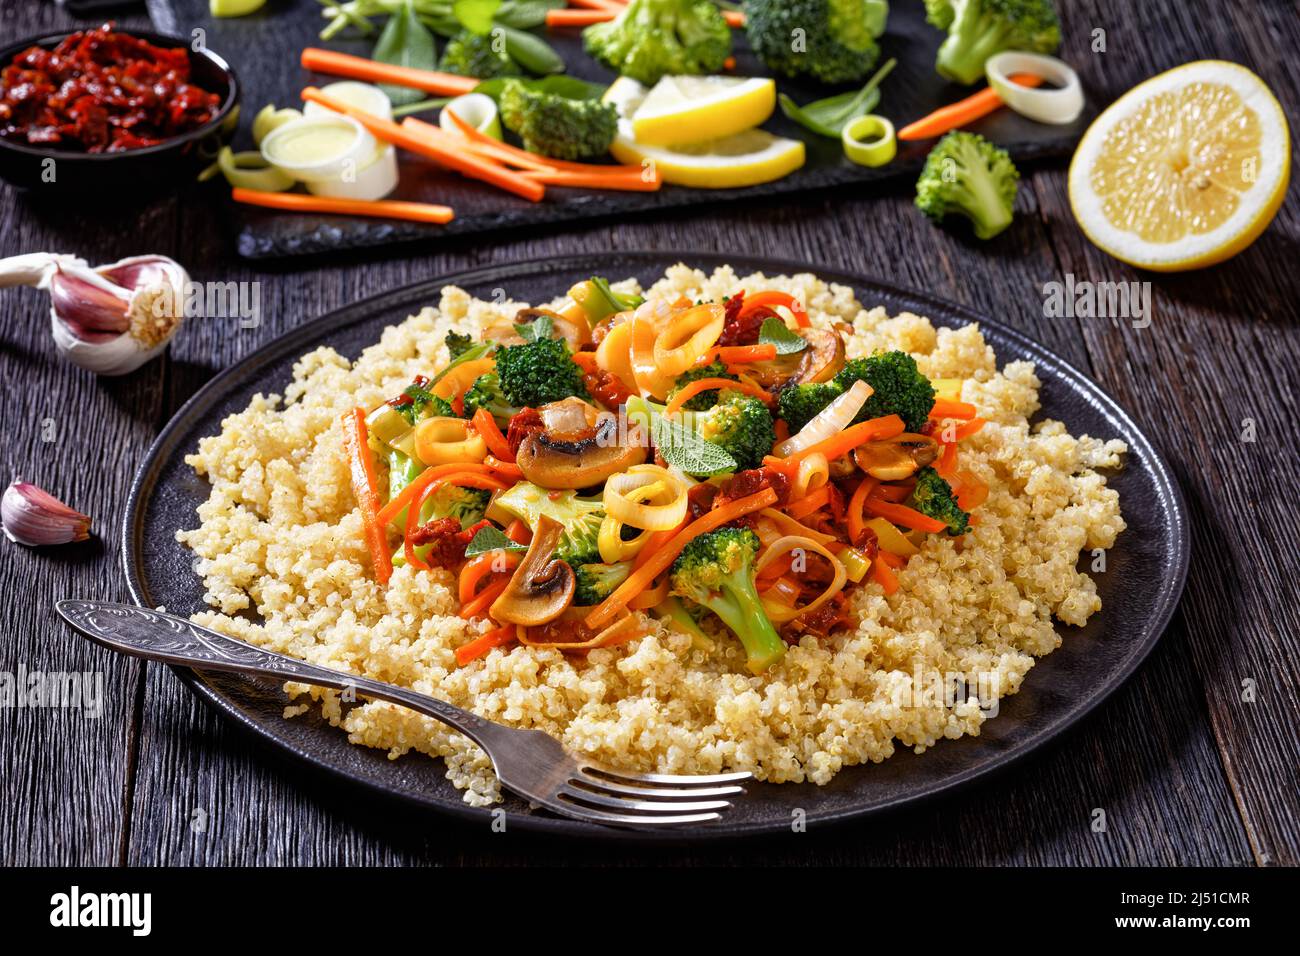 quinoa topped with stir fried broccoli, julienne carrots, sun dried tomatoes, leek and mushrooms on black plate on dark wooden table with ingredients Stock Photo